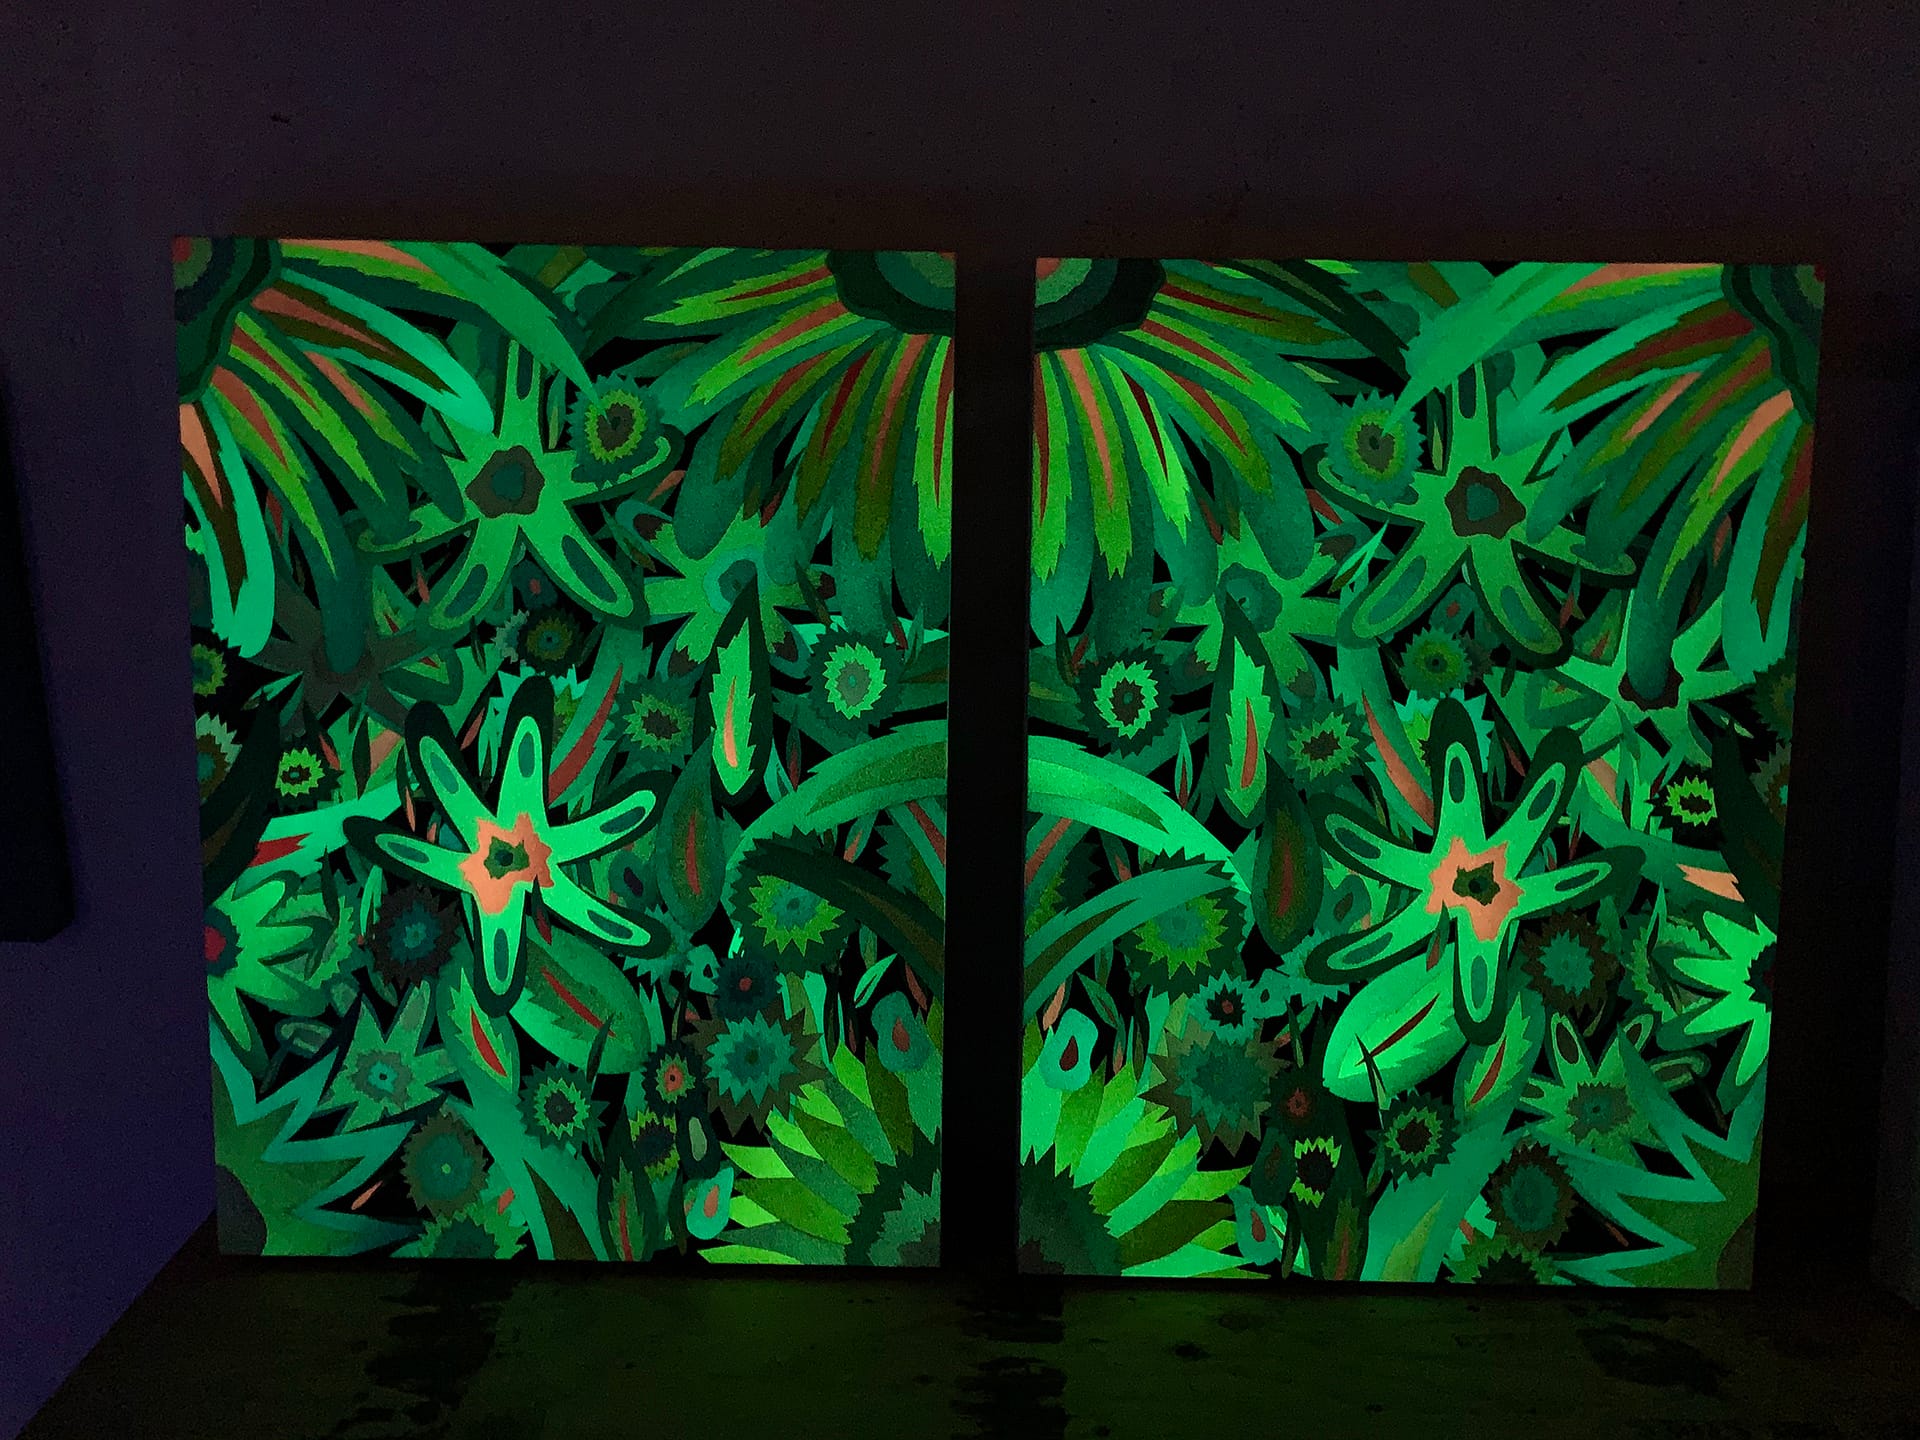 Neon_Flowers_Glow_in_the_Dark_Diptych_Michael_Callas_spray_paint_and_stencil_on_canvas_44_x_30_ii